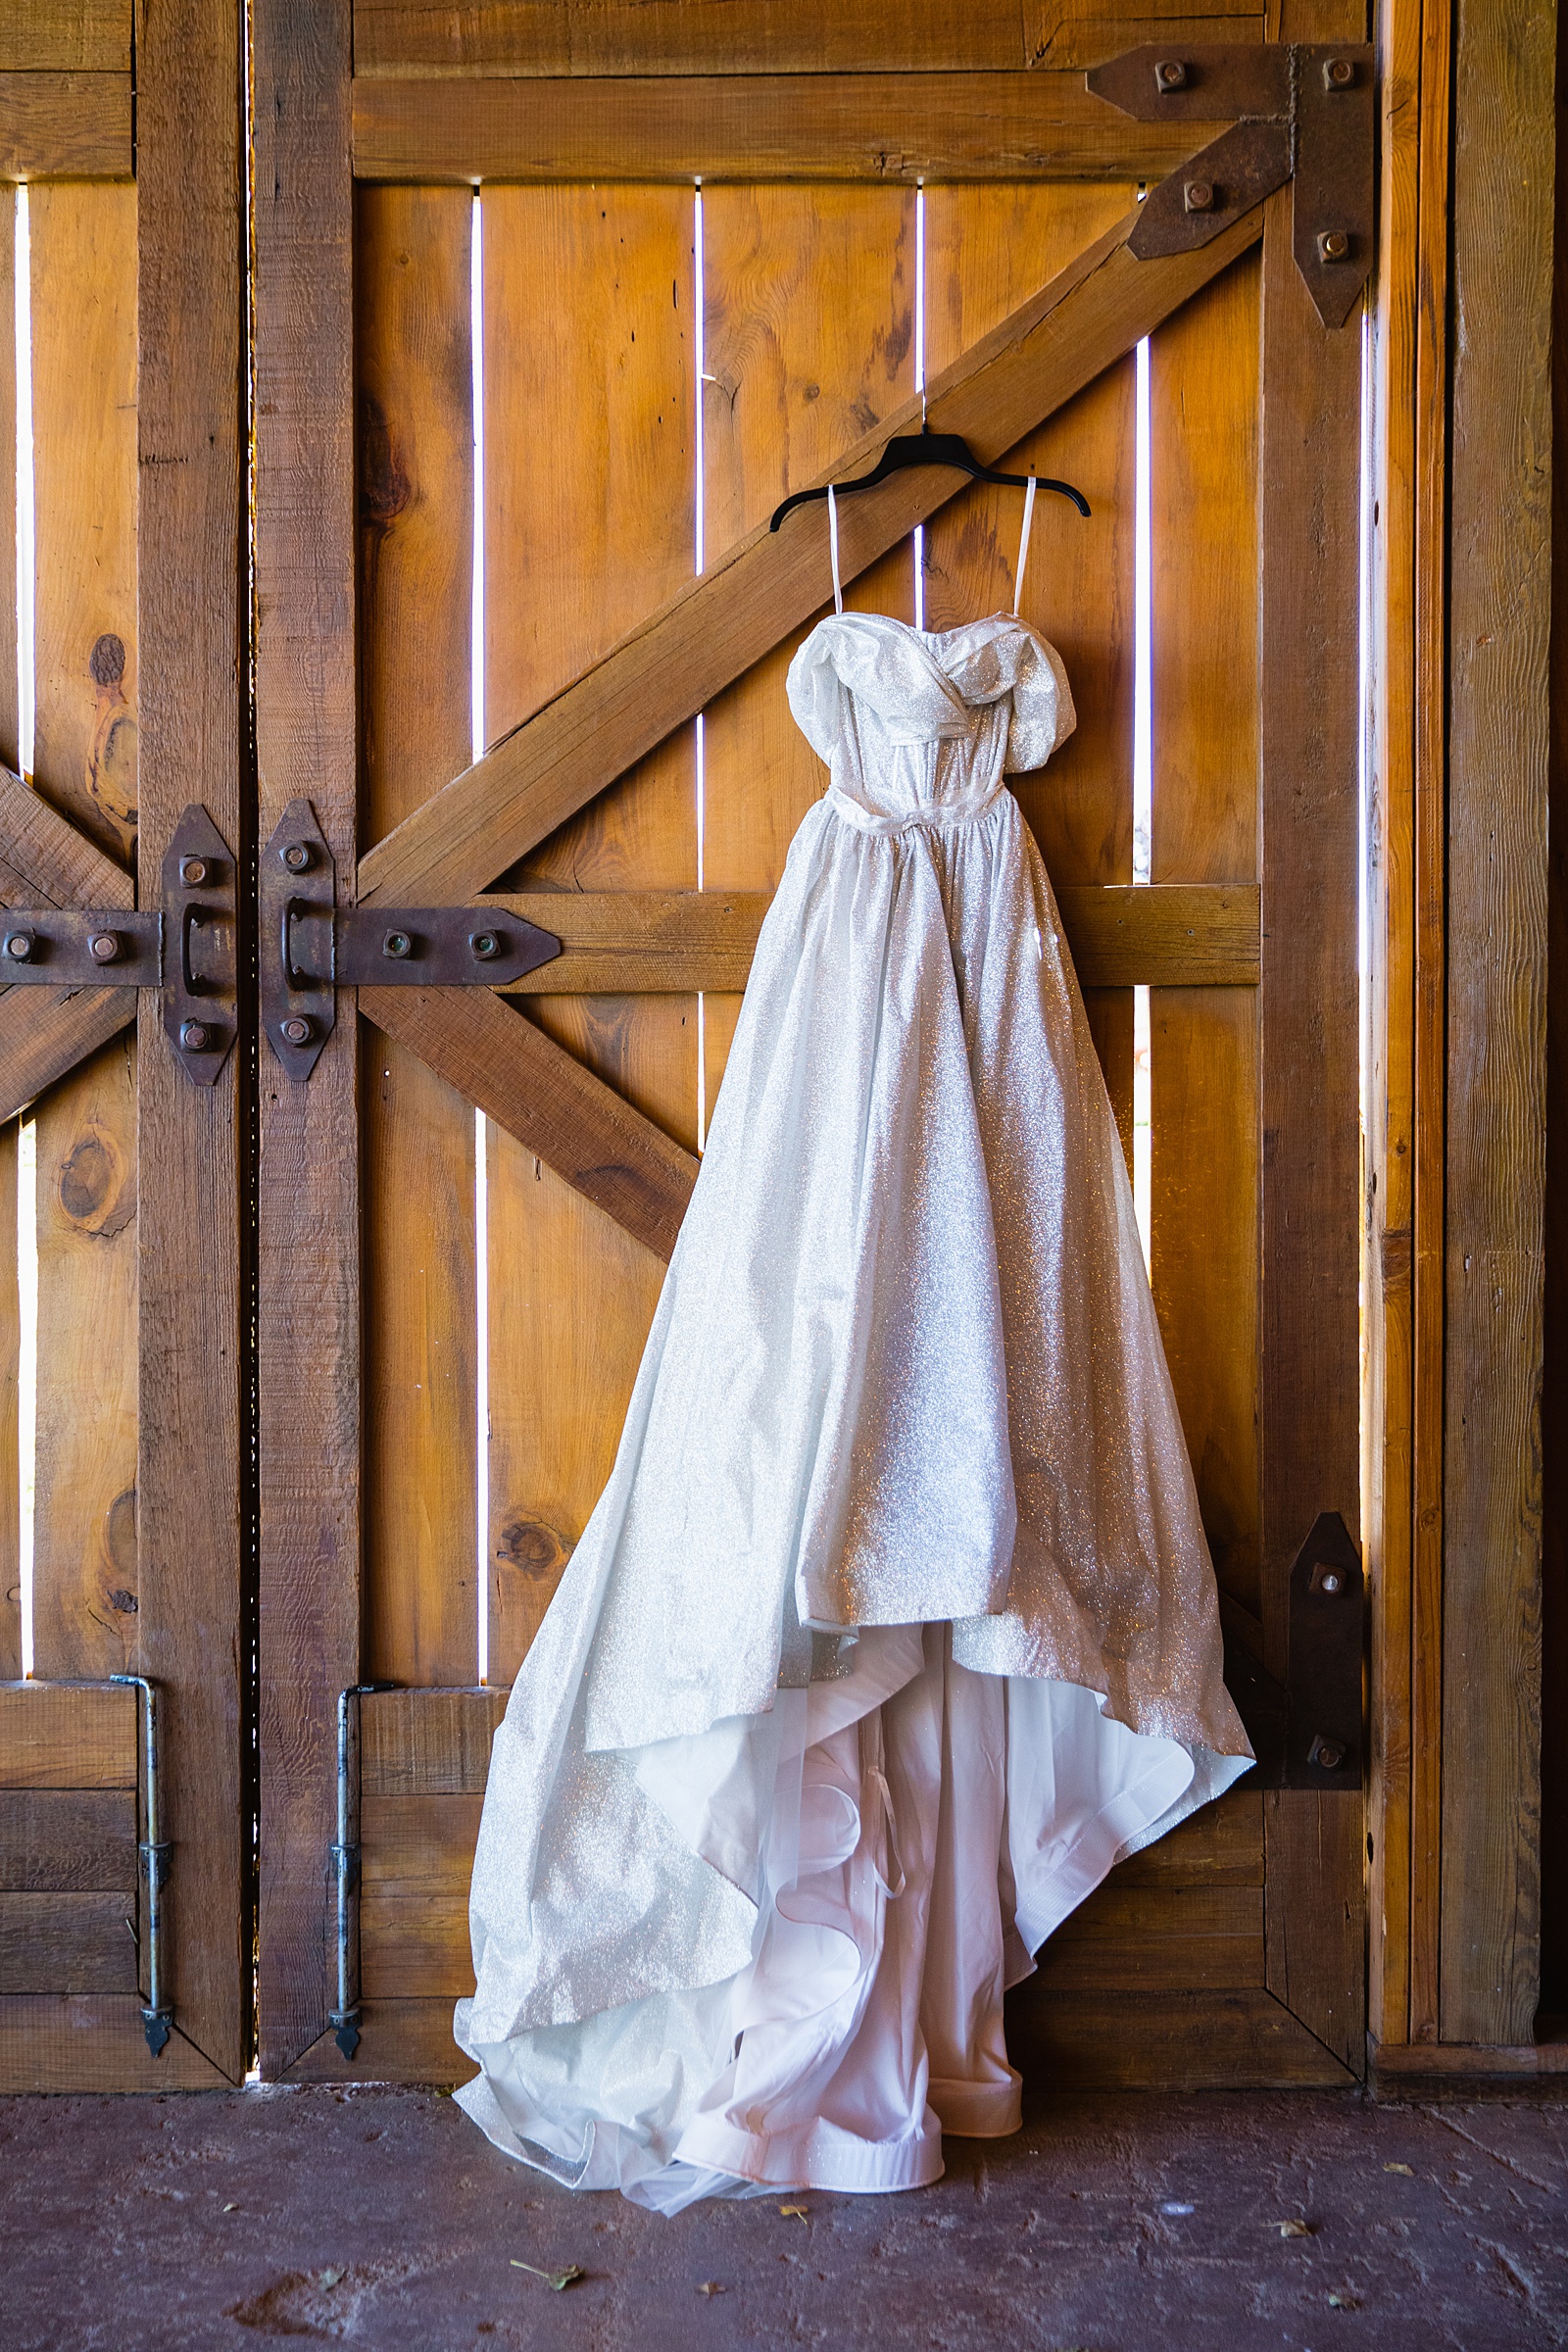 Brides's wedding day details of Cinderella inspired wedding dress by PMA Photography.